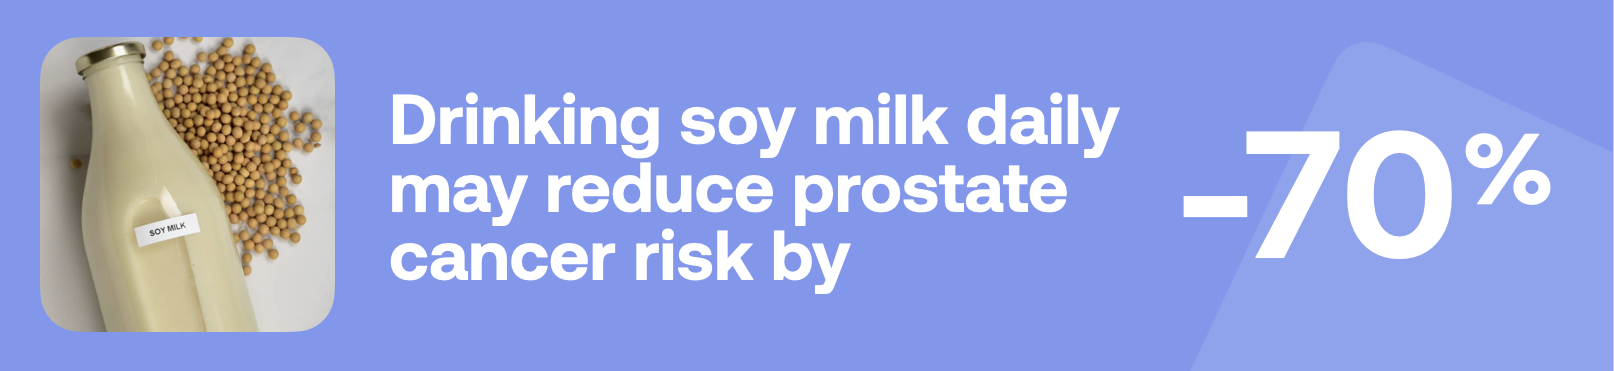 Drinking soy milk daily may reduce prostate cancer risk by -70%